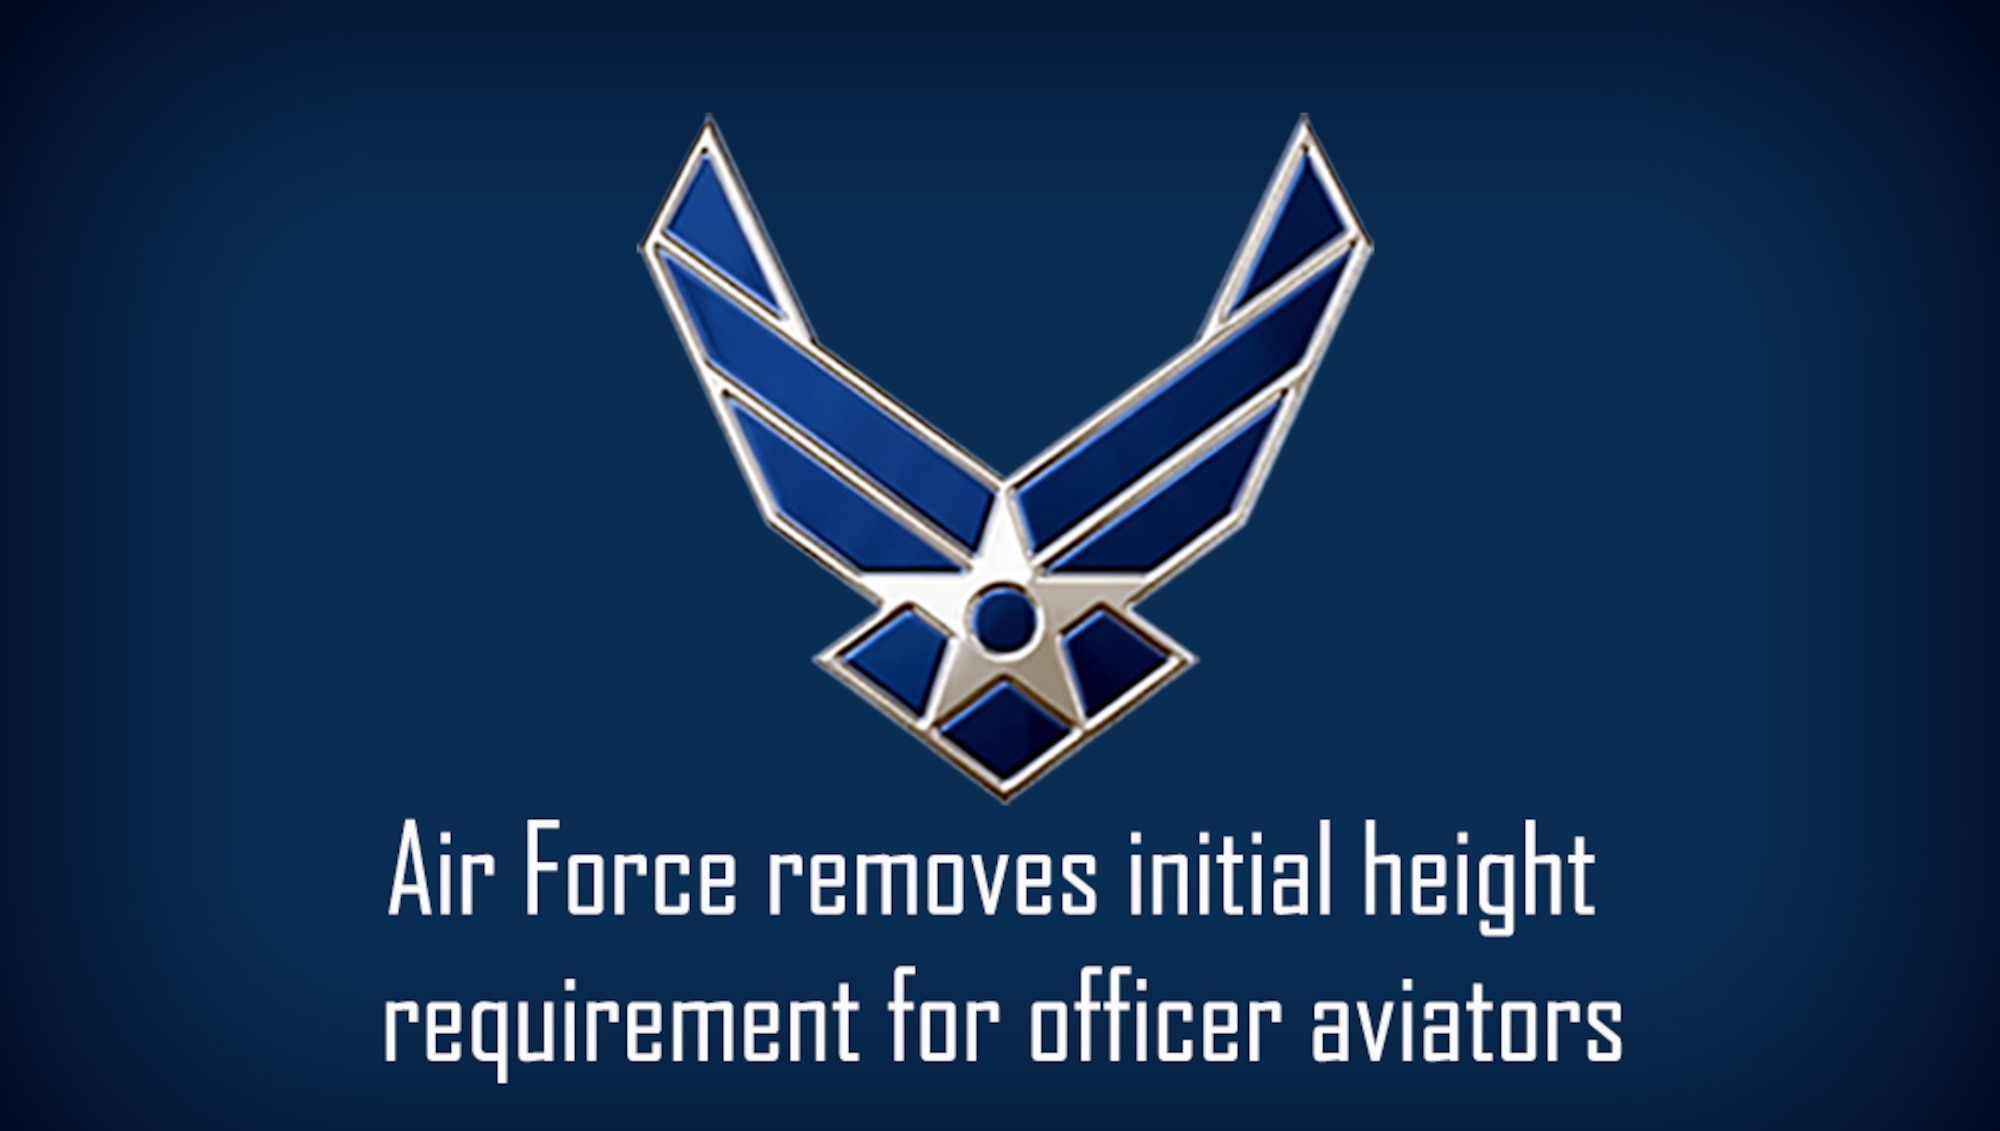 Air Force removes initial height requirement for officer aviators ></noscript> Air ...